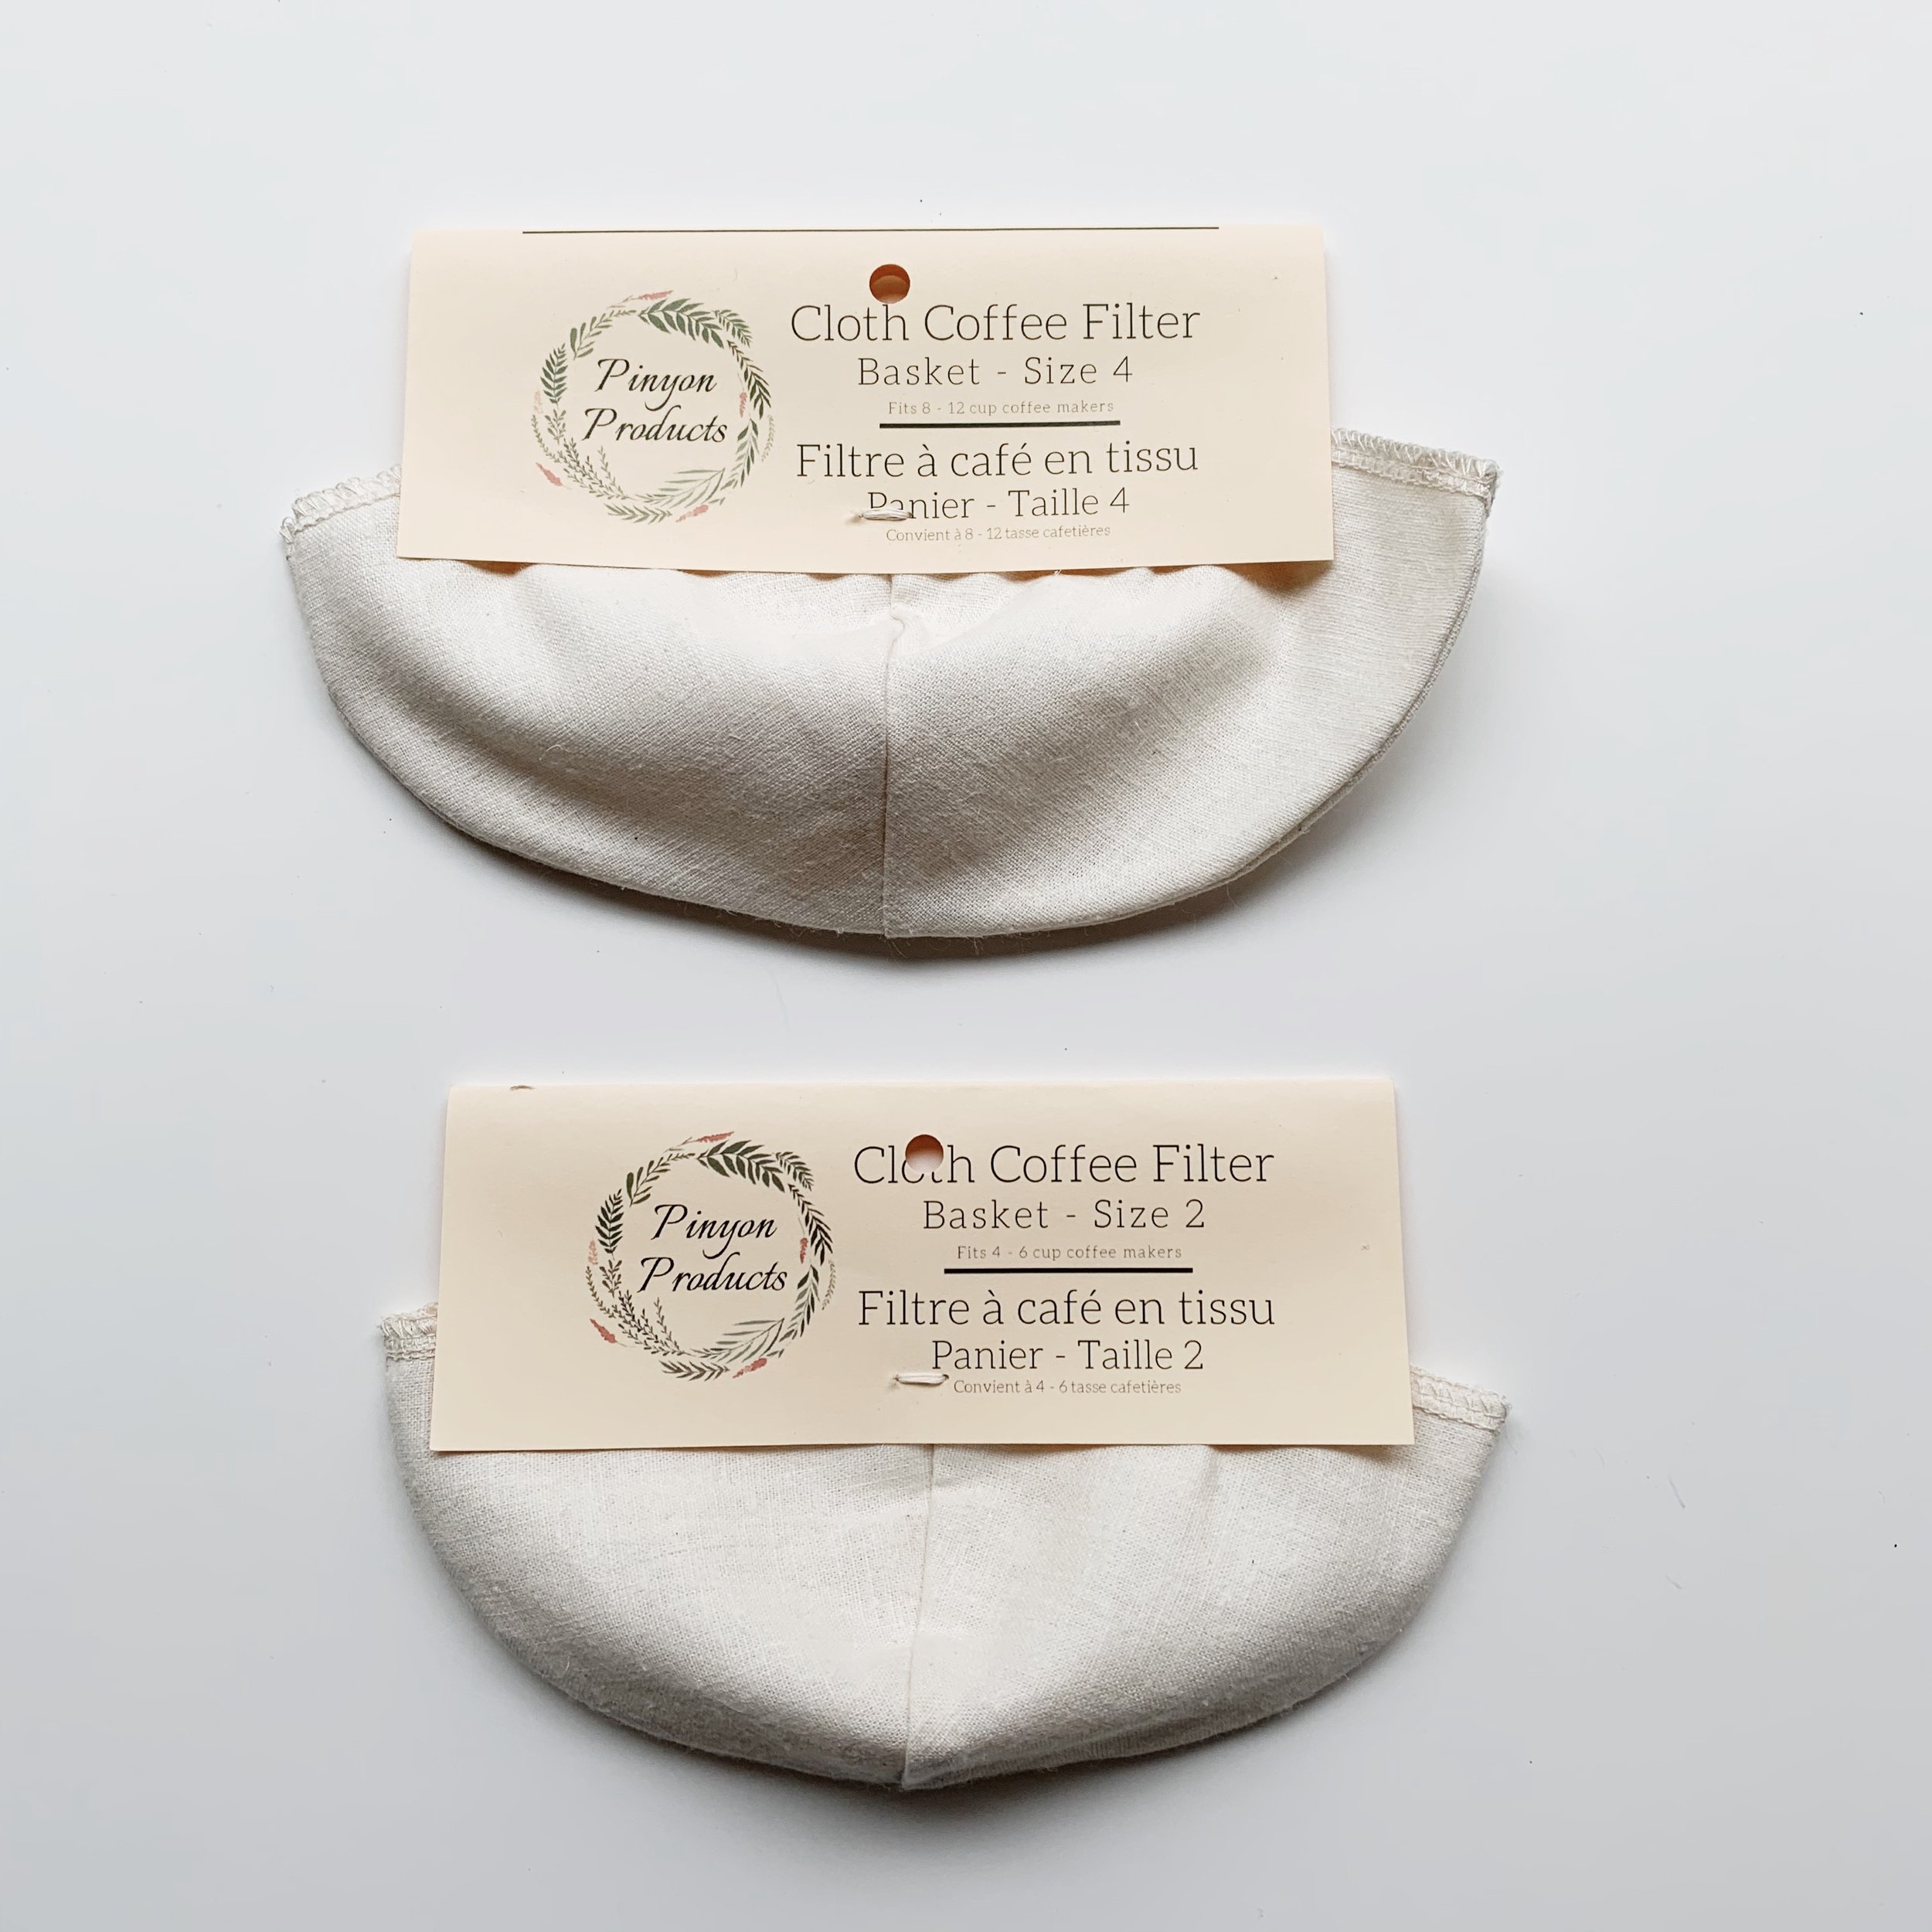 Reusable Coffee Filters - $10.00